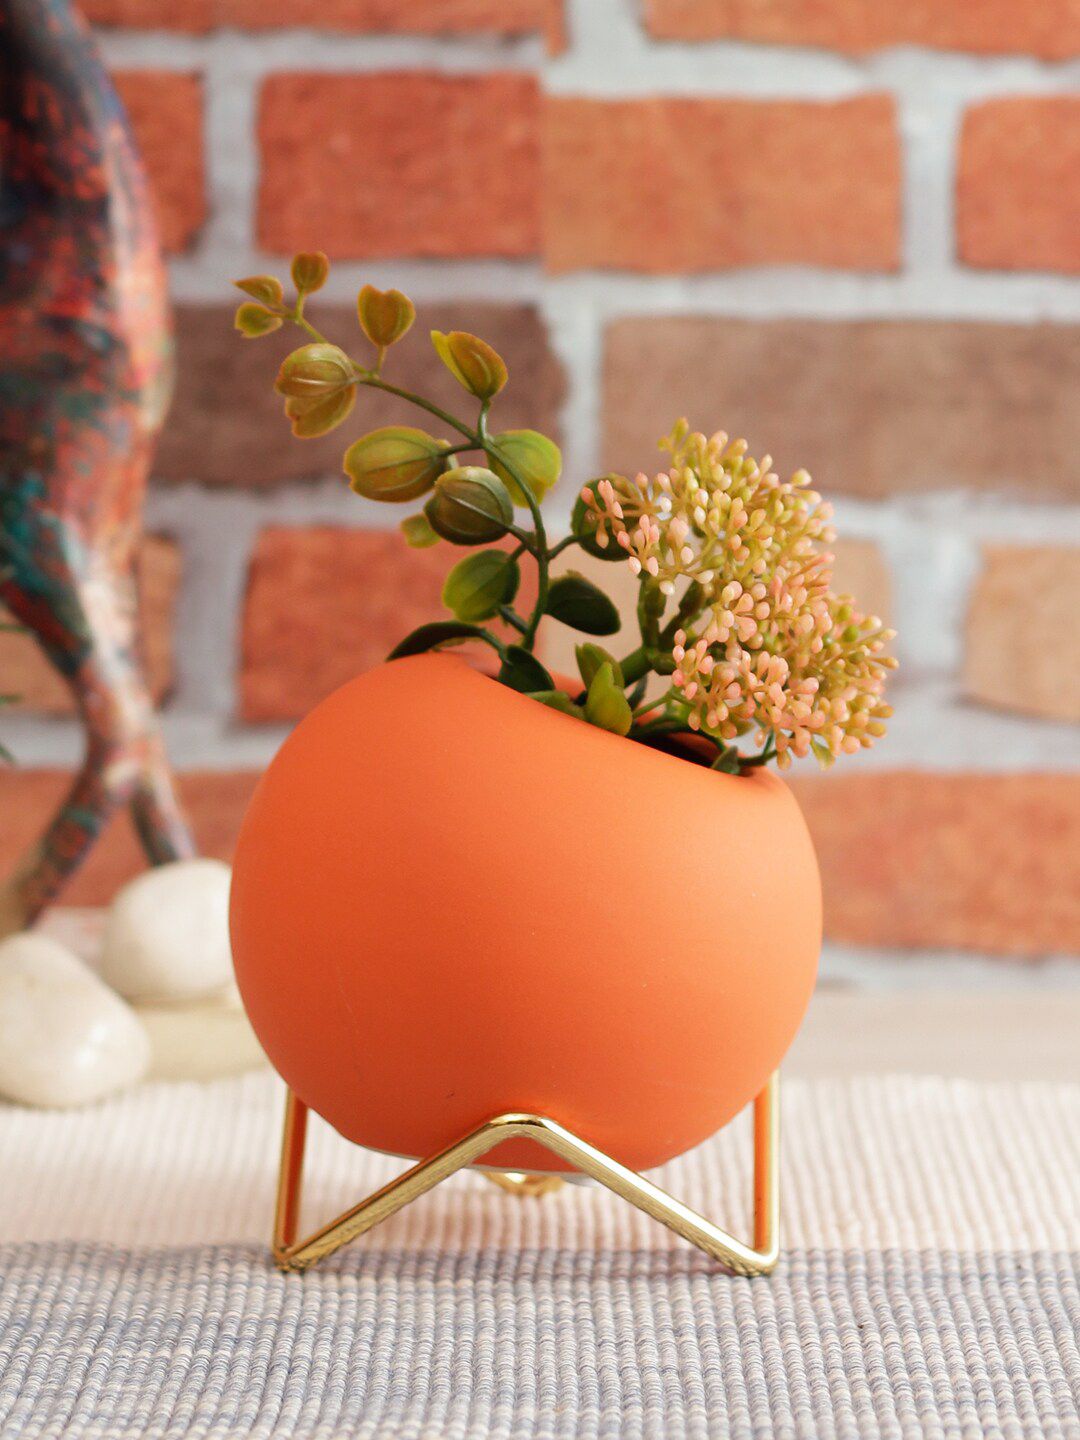 TAYHAA Orange Solid Ceramic Flower Vase With Gold-Toned Stand Price in India